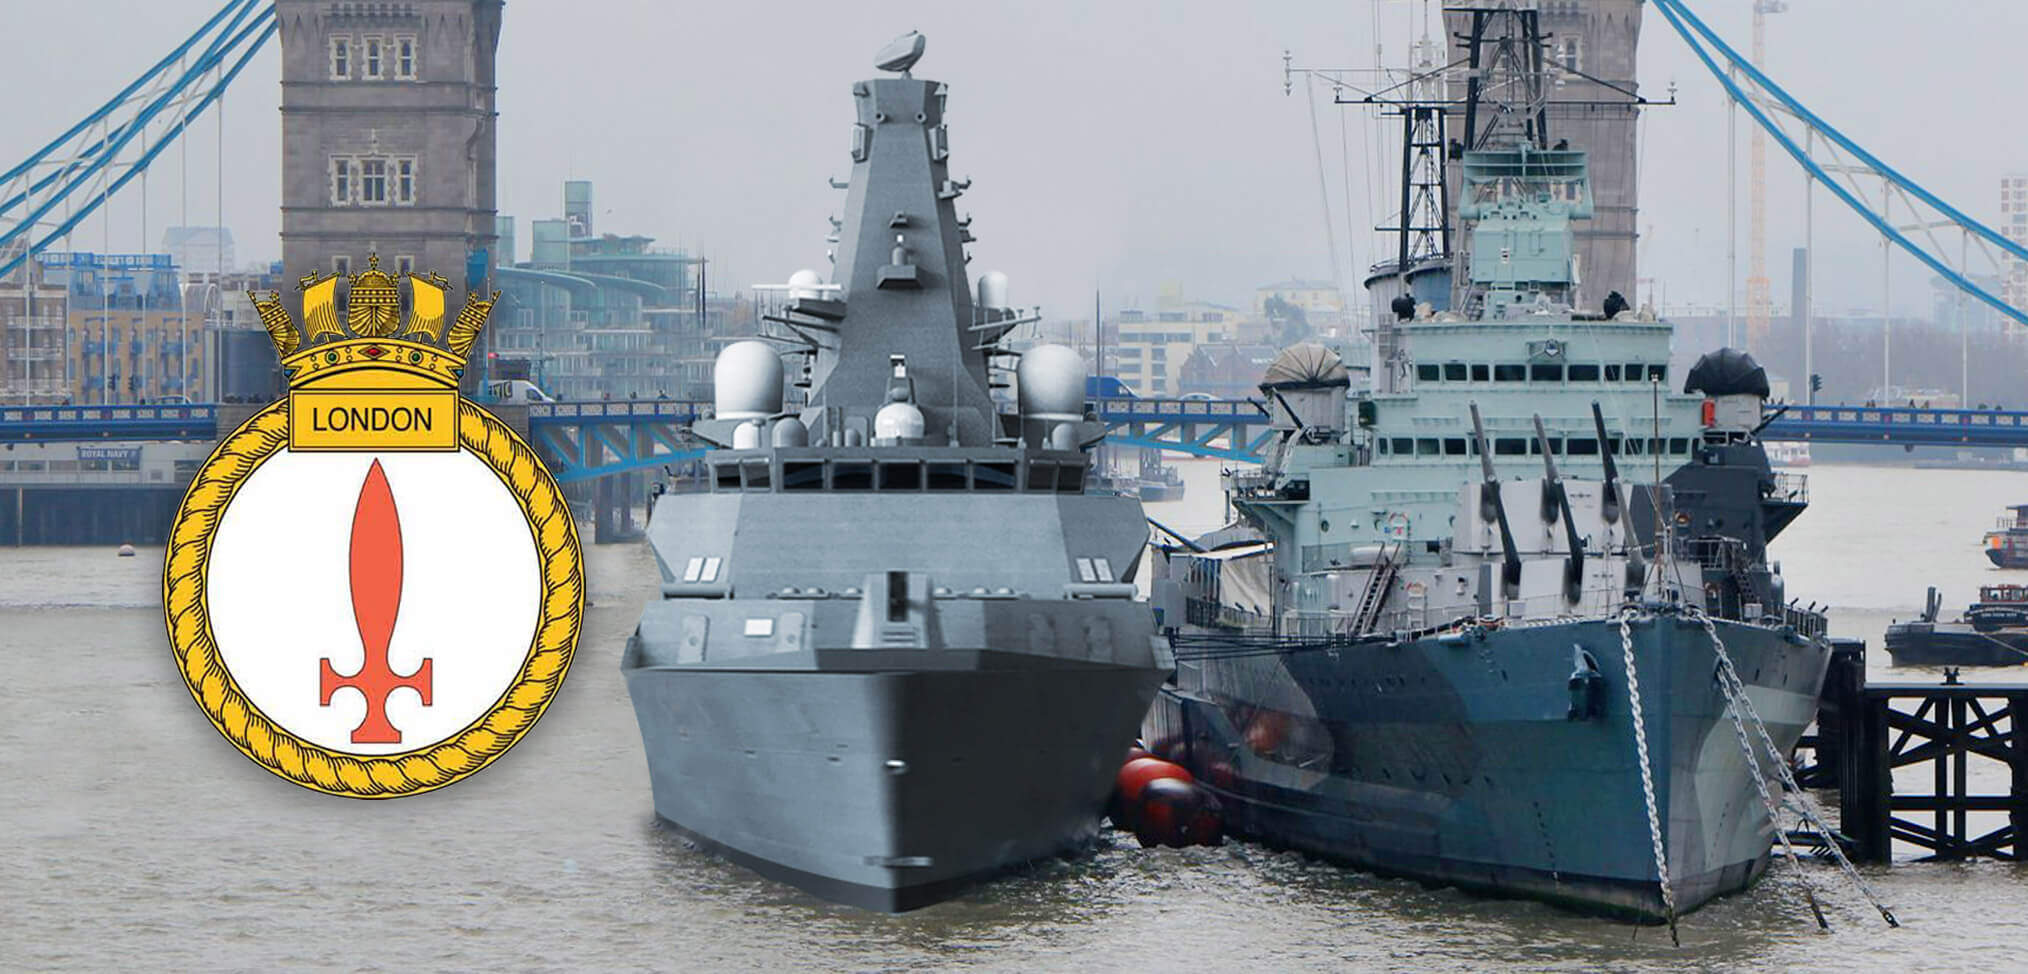 Counting chickens before they hatch… 8th Type 26 Frigate to be named HMS London